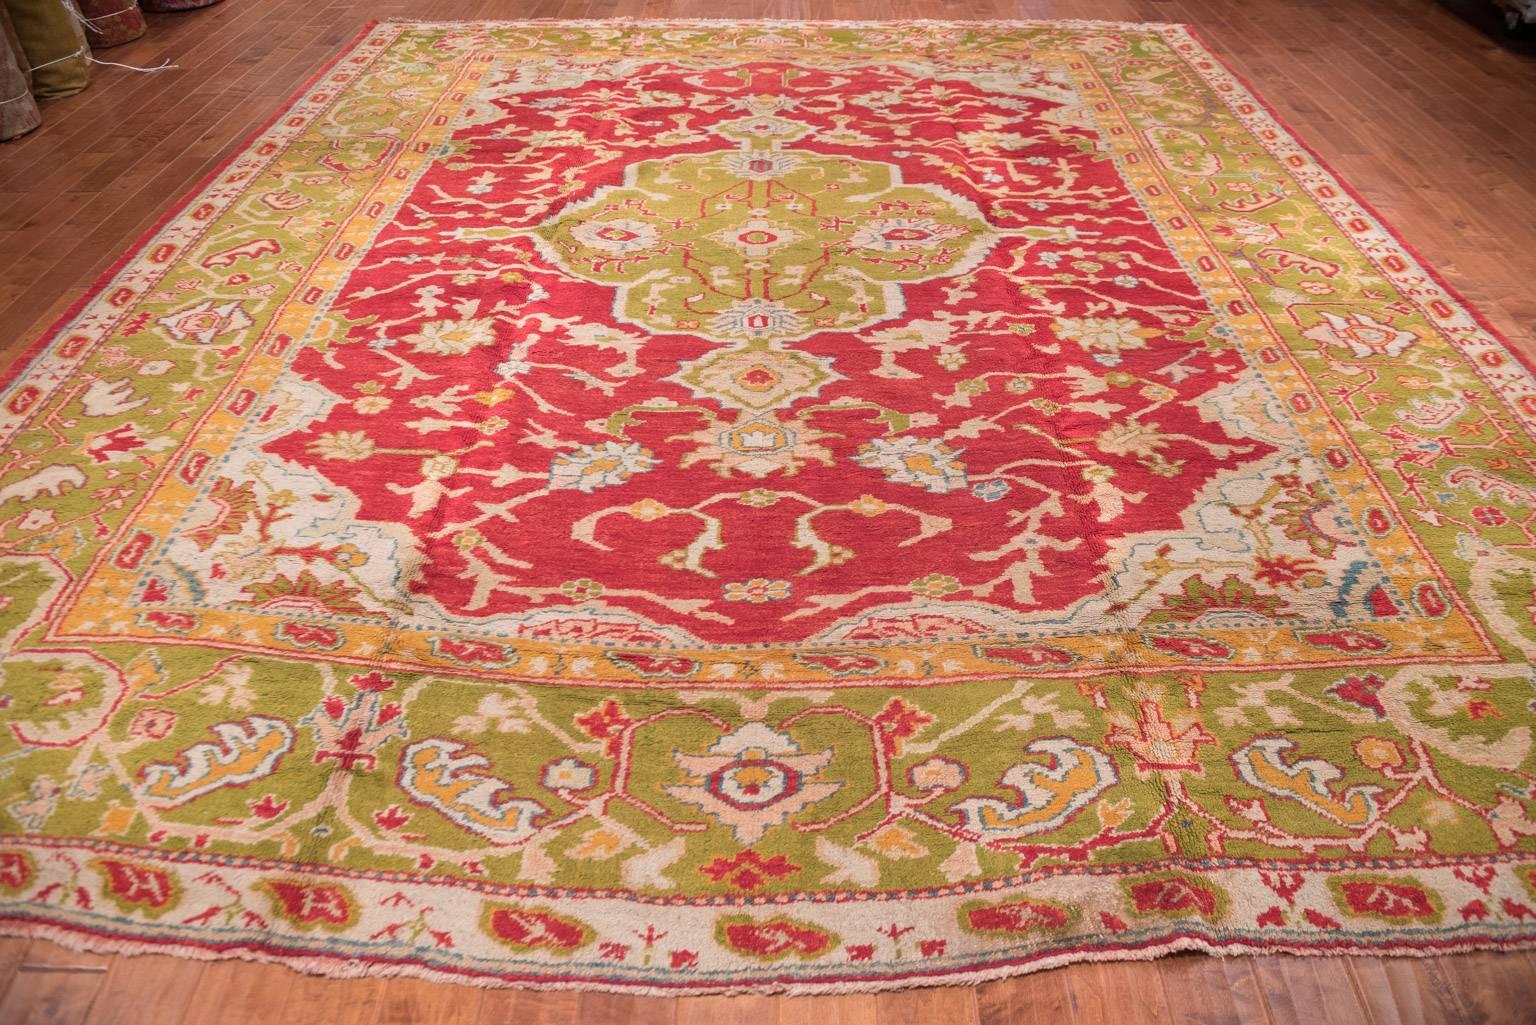 Antique Oushak carpet woven in near squarish format, will bring the pop of life missing in decor. Woven in western central Anatolia during the 19th century.
This is class act is ideal for any creative type and exudes great energy. Woven in western